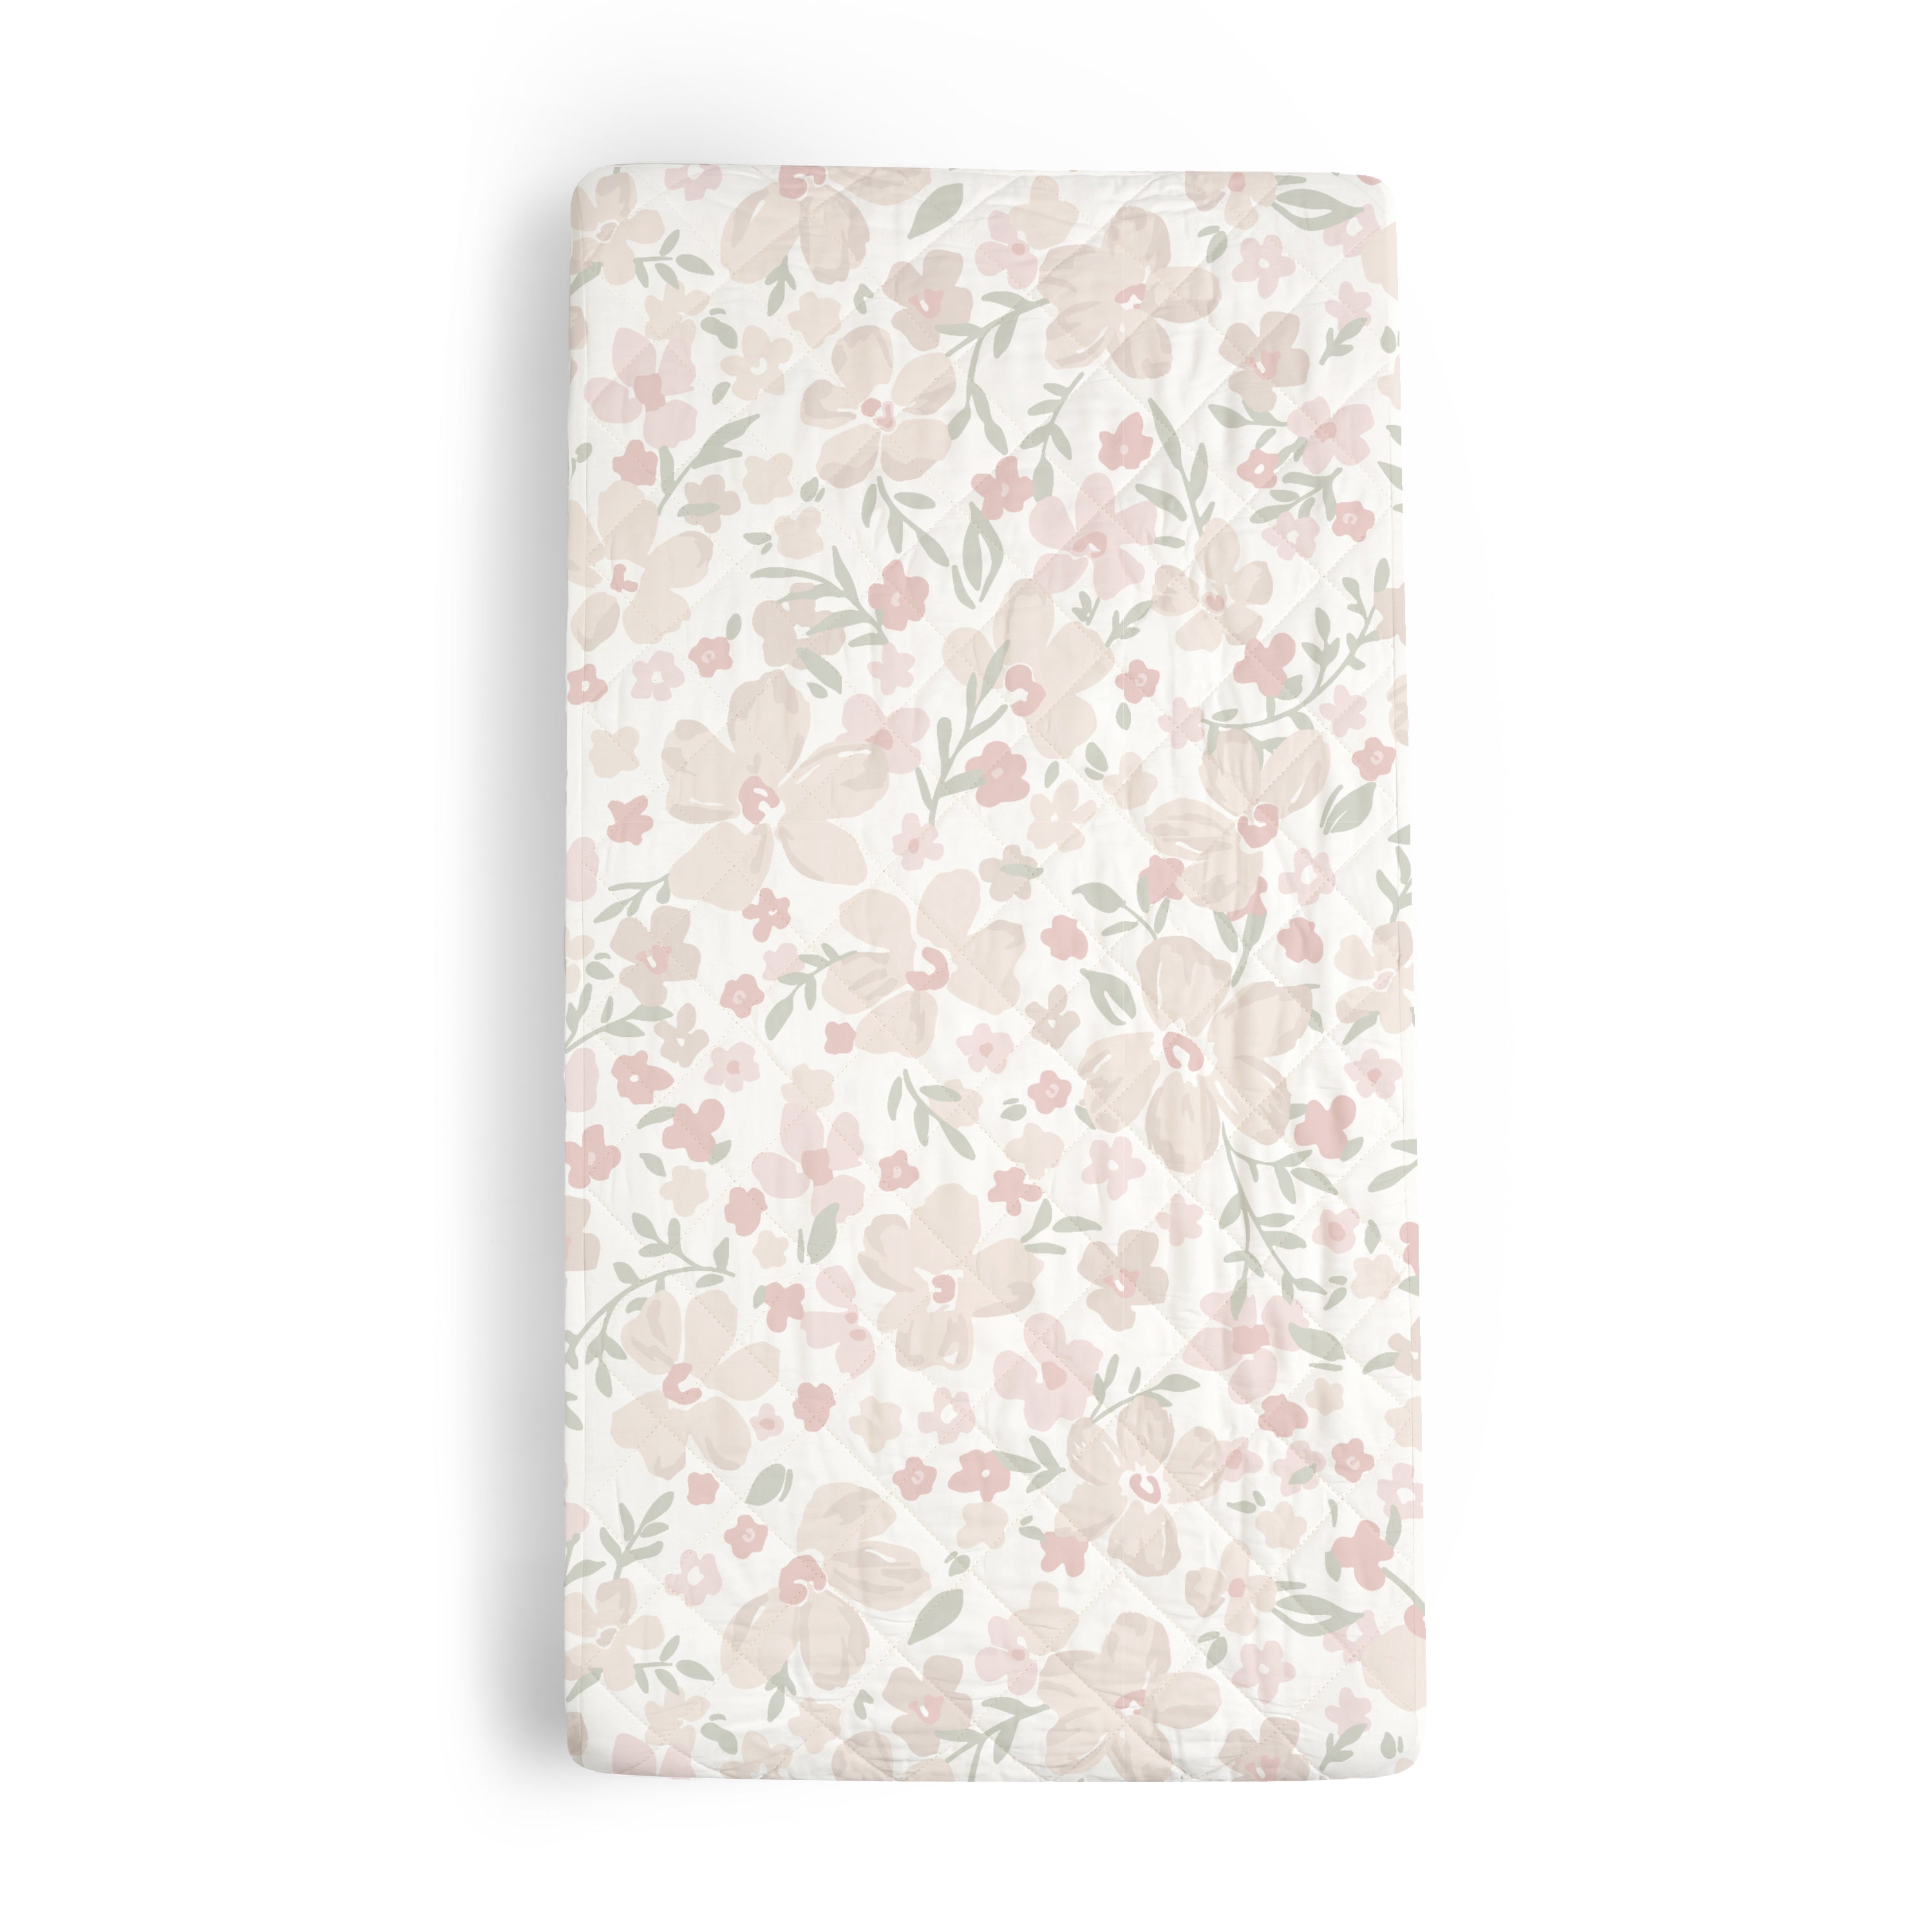 A Makemake Organics Organic Cotton Changing Pad Cover - Blossom with soft hues of pink, green, and cream depicted vertically, suggesting a gentle and calming design suitable for a restful bedroom environment.